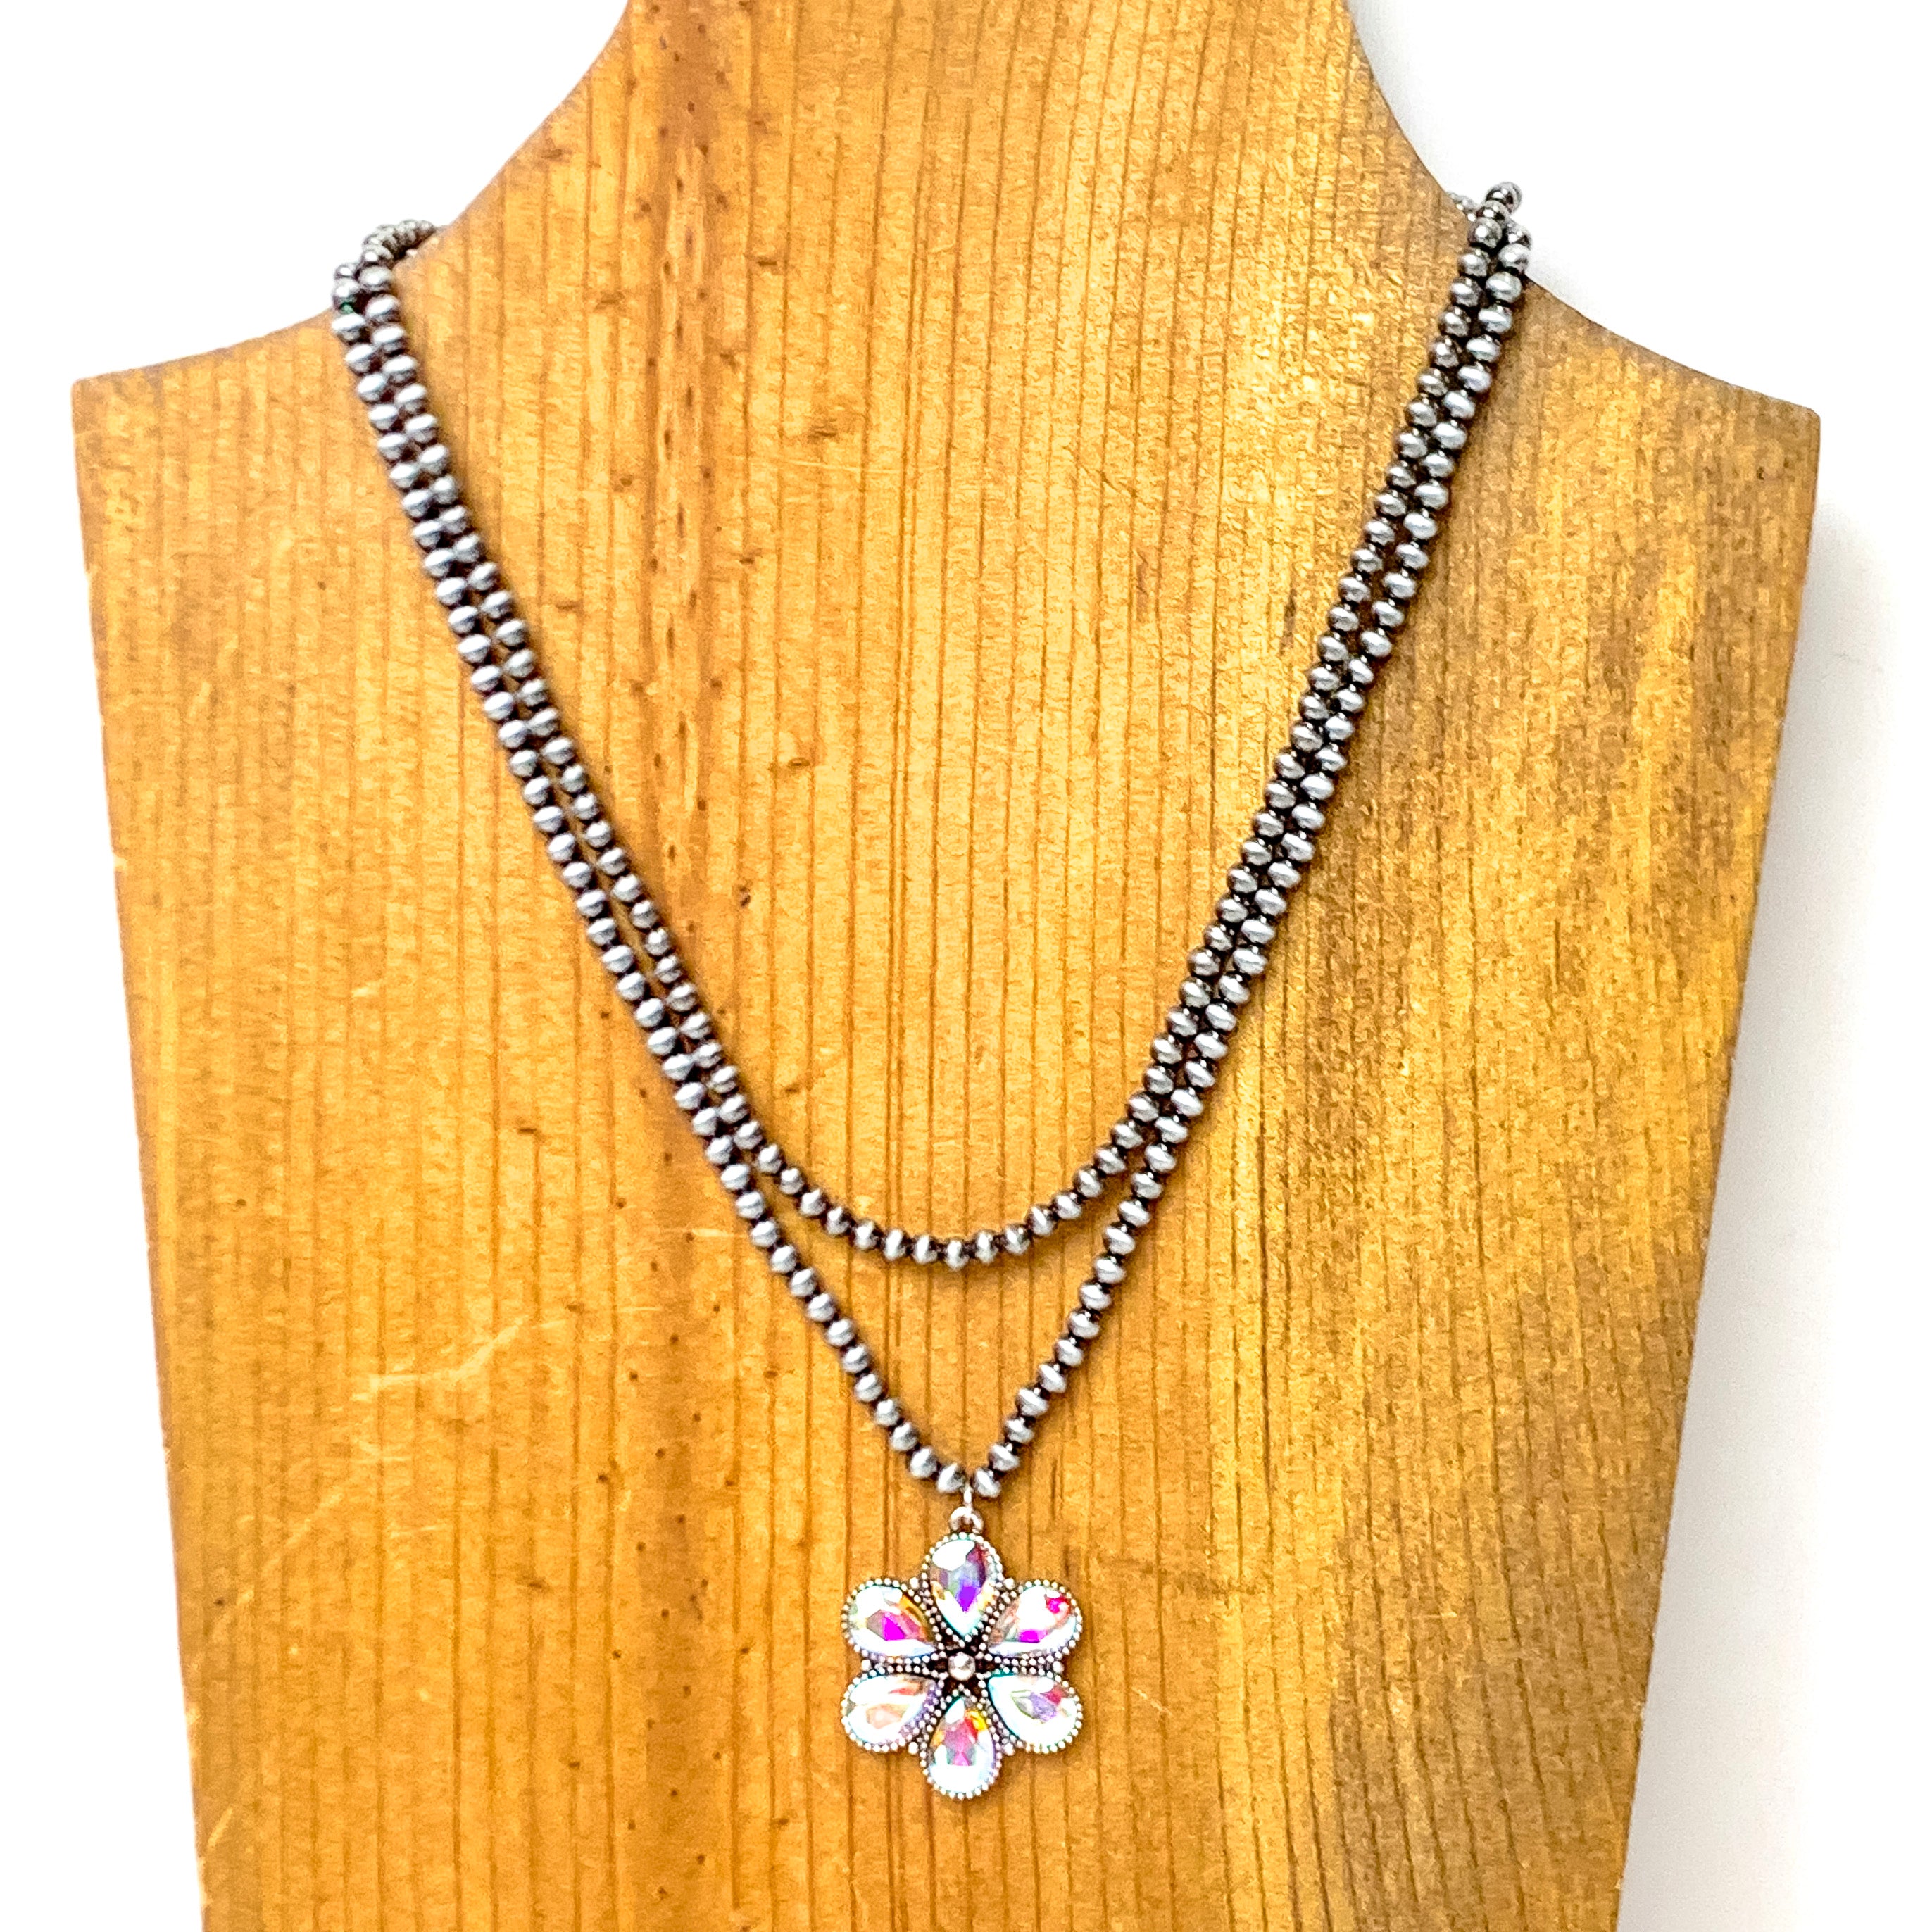 Bourbon Blooms Faux Navajo Pearl Necklace in Silver Tone - Giddy Up Glamour Boutique